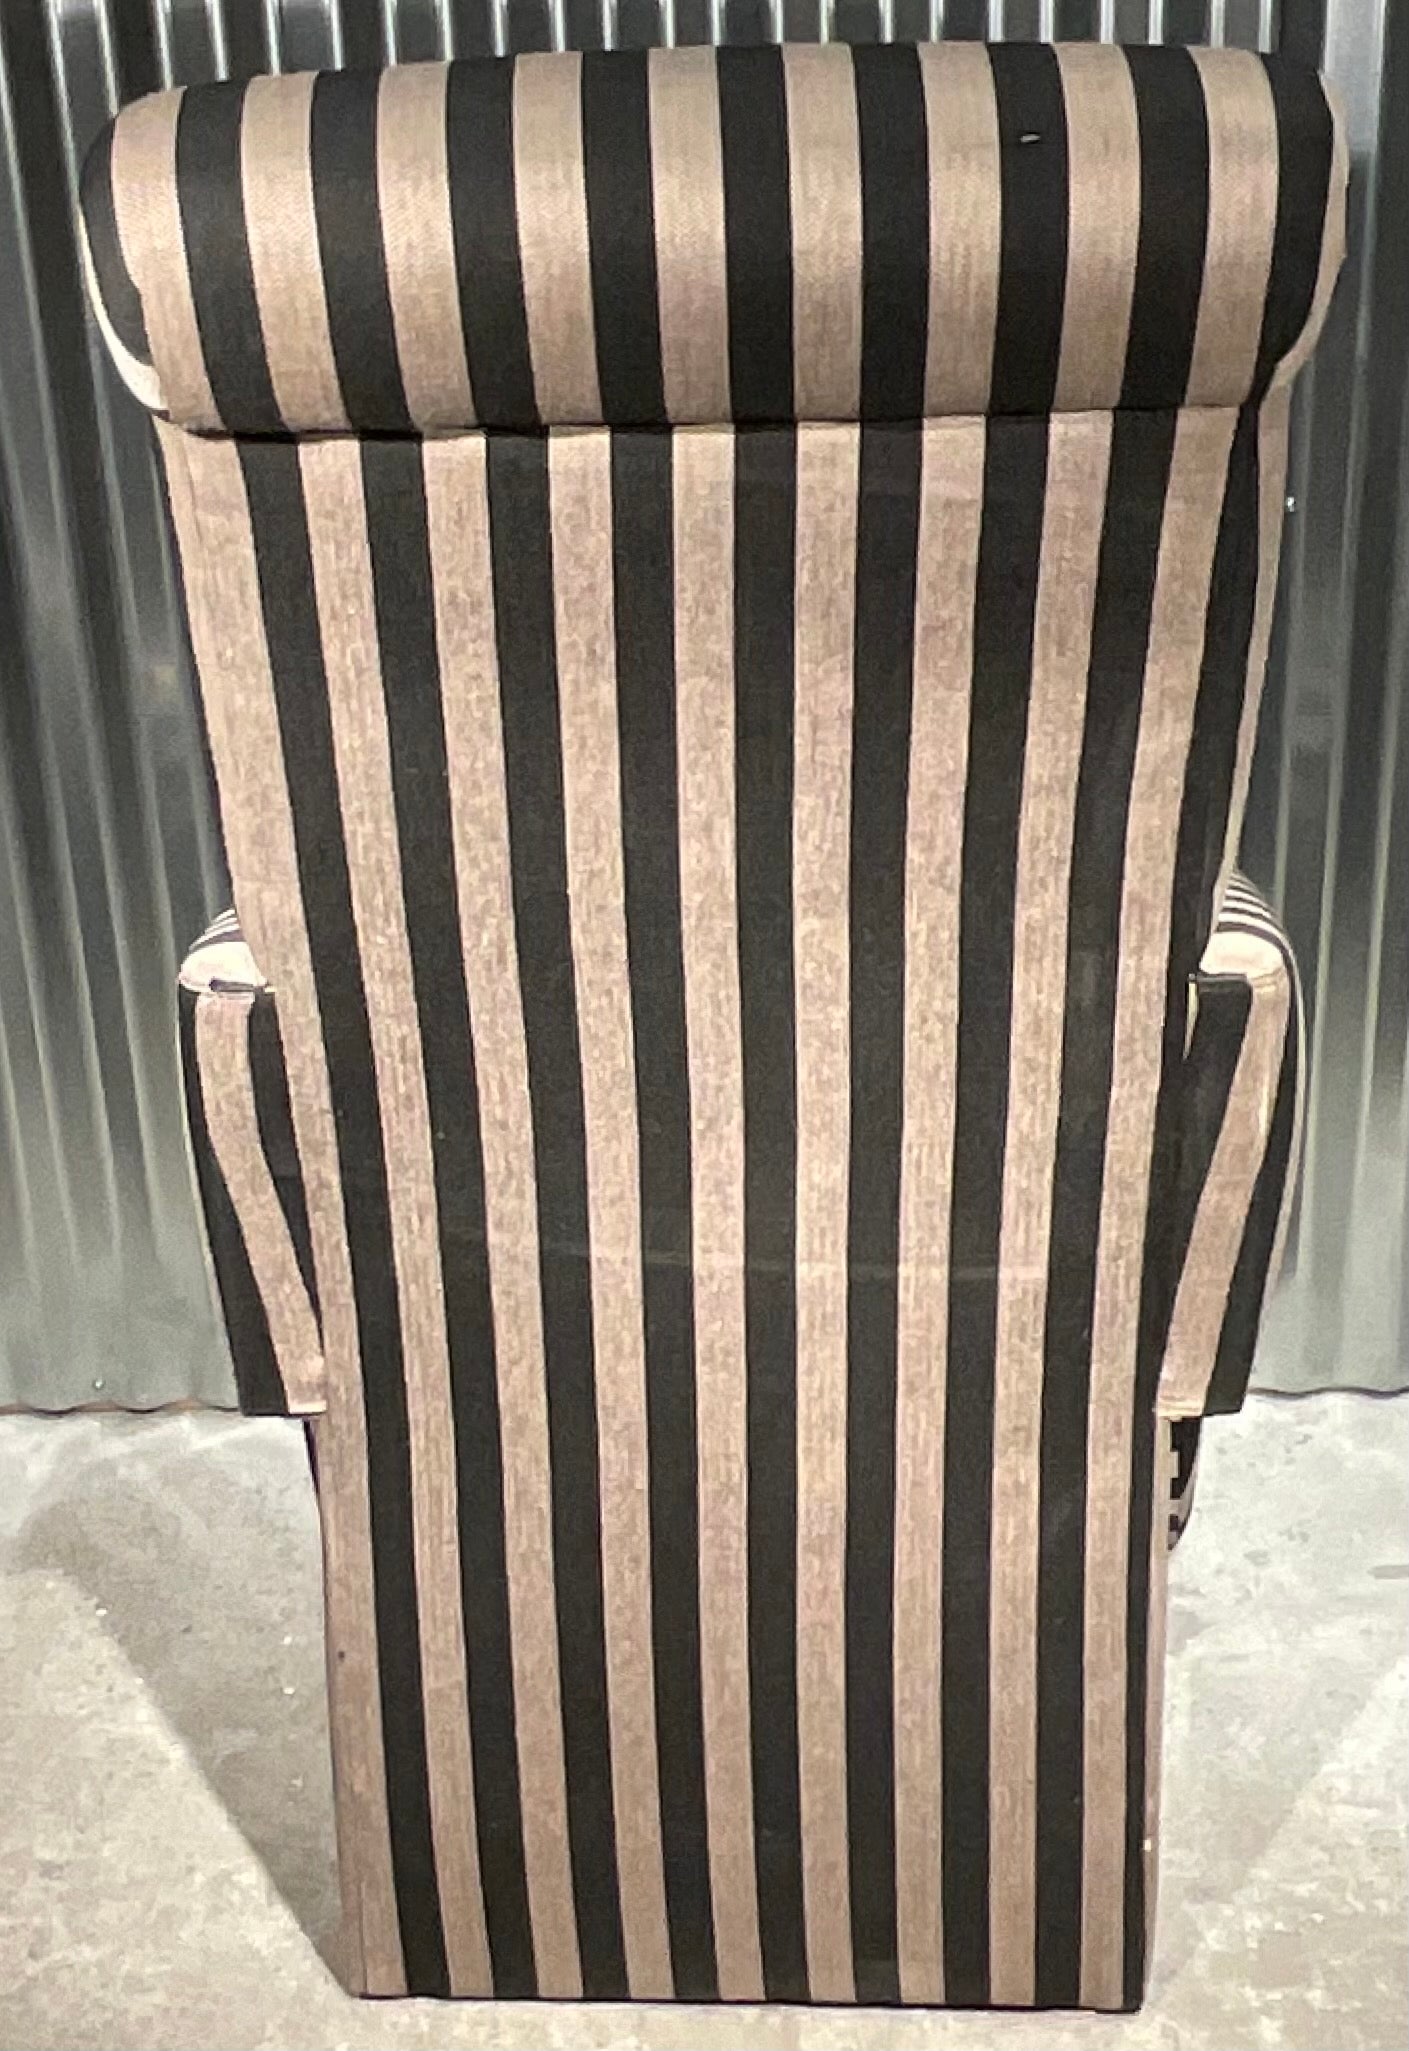 Pair of Striped Chairs